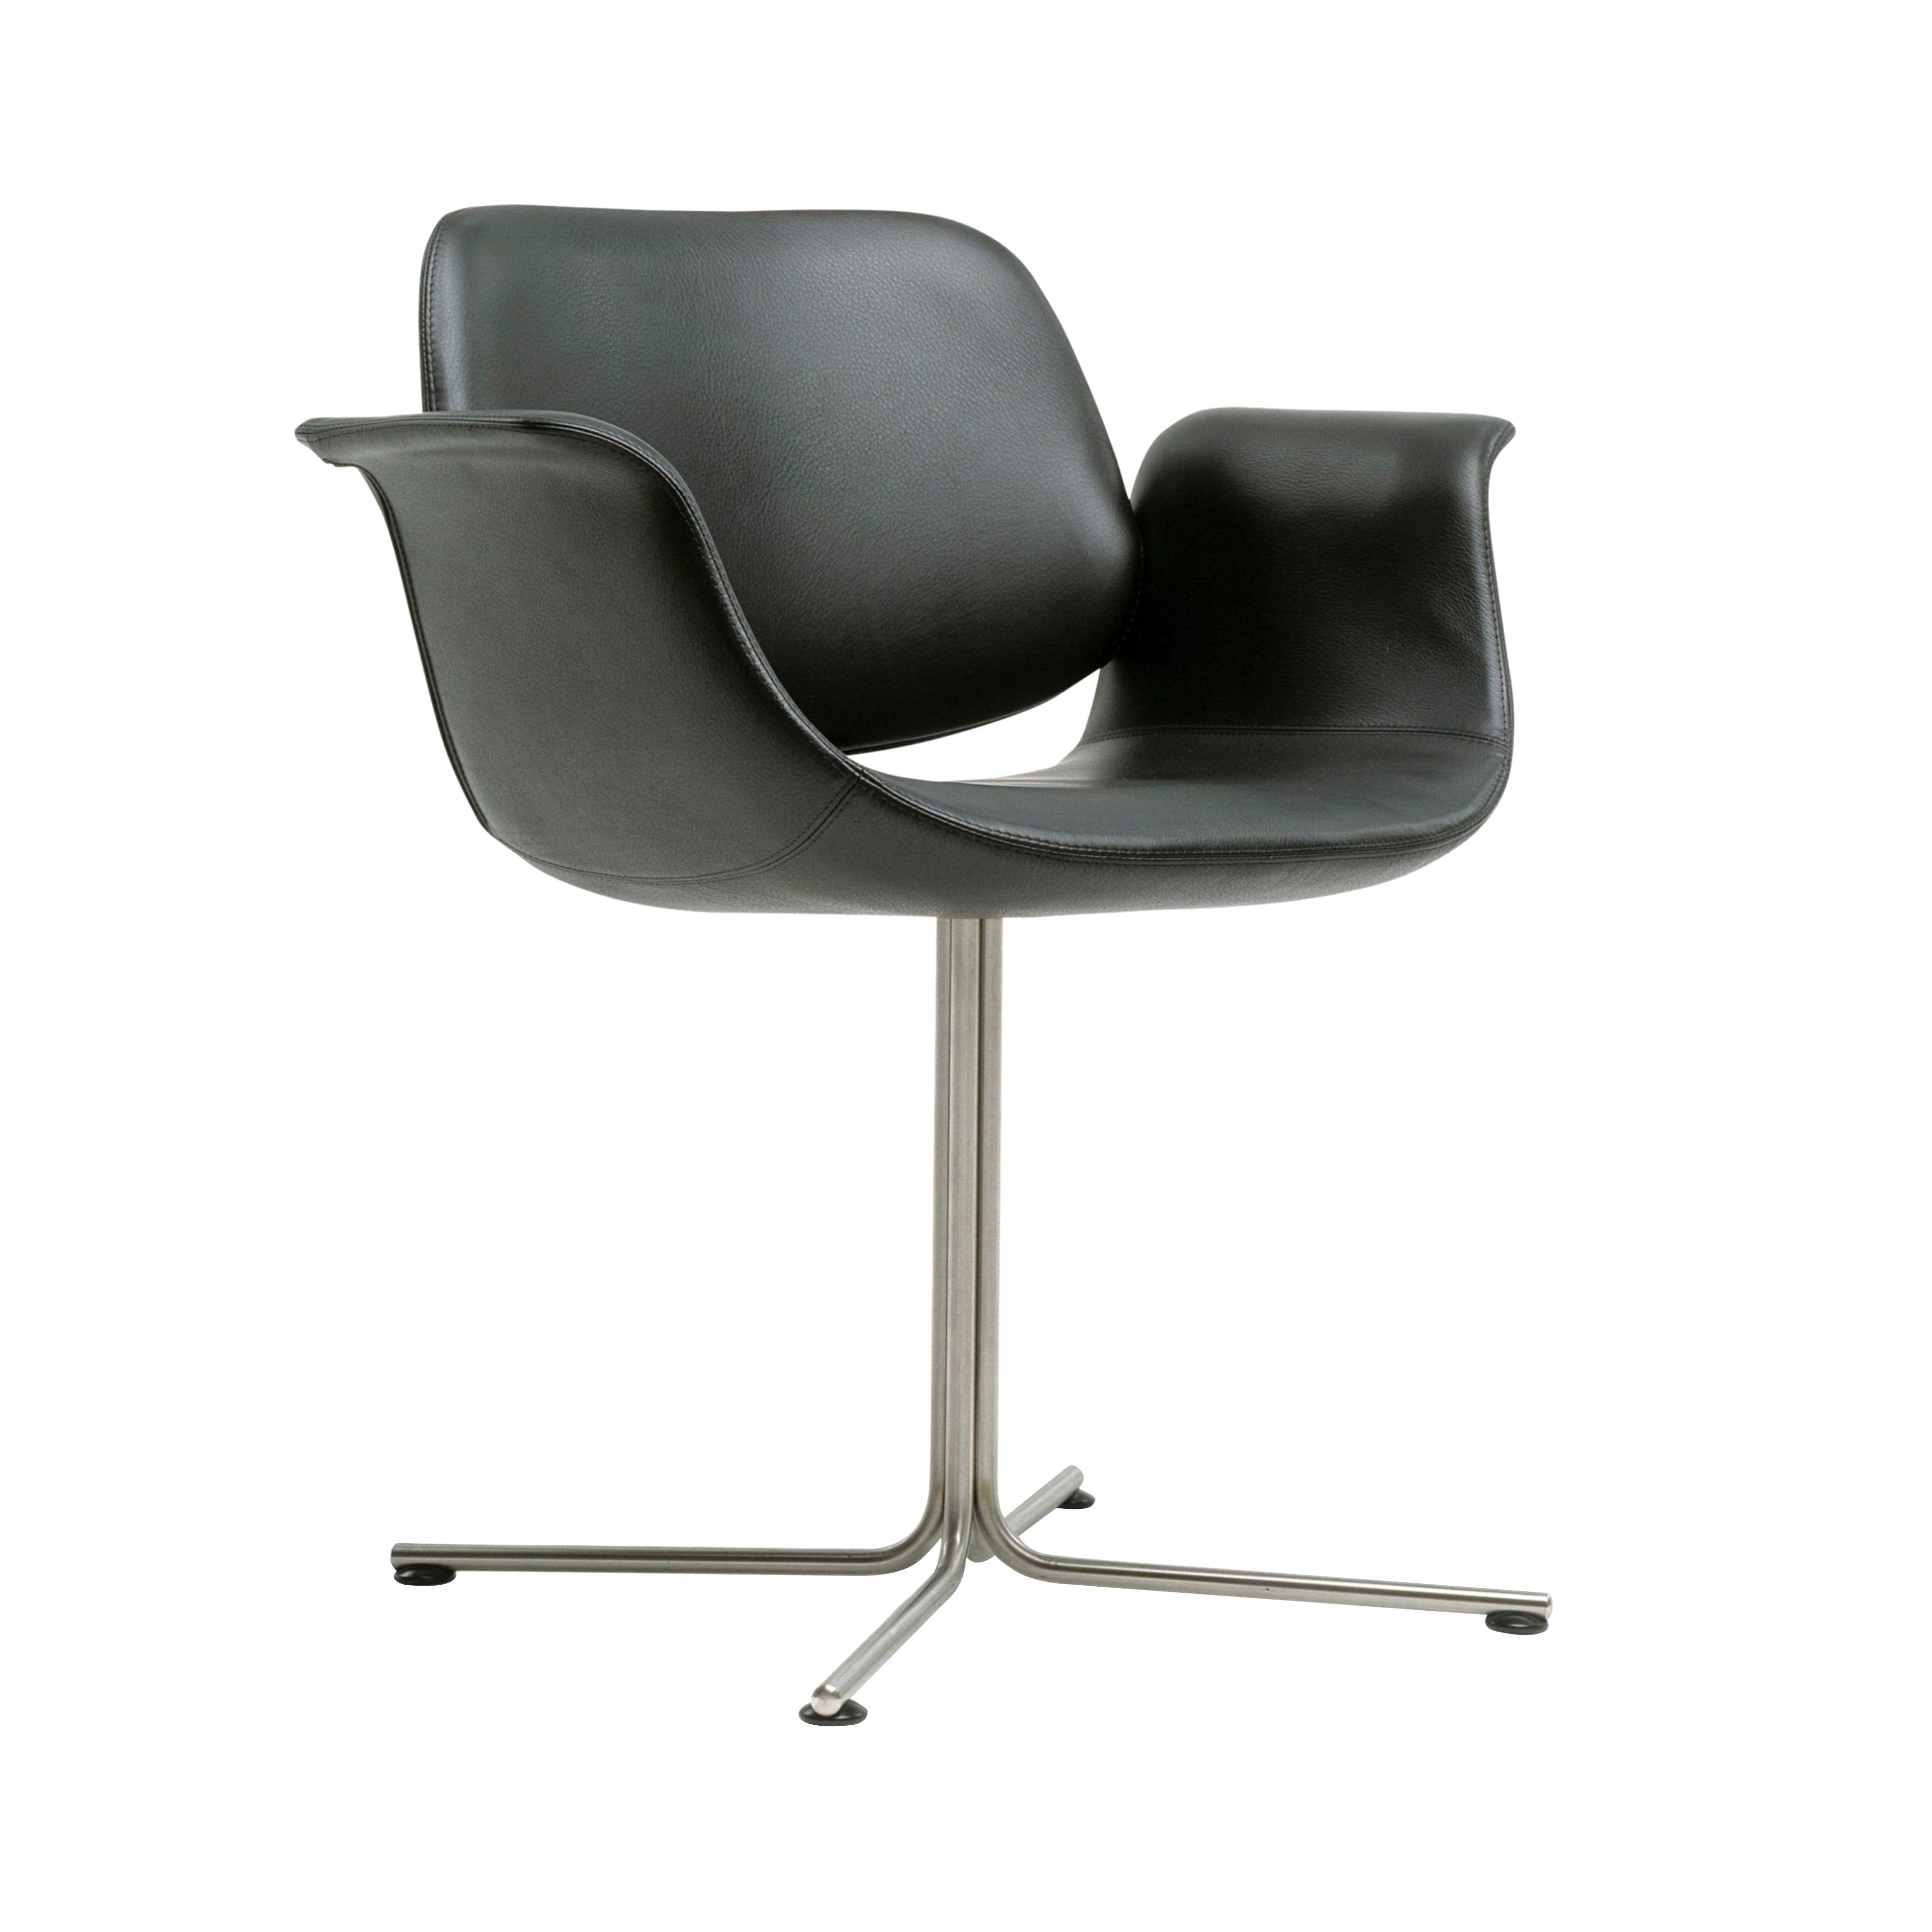 Flamingo Chair: Brushed Stainless Steel + Fixed